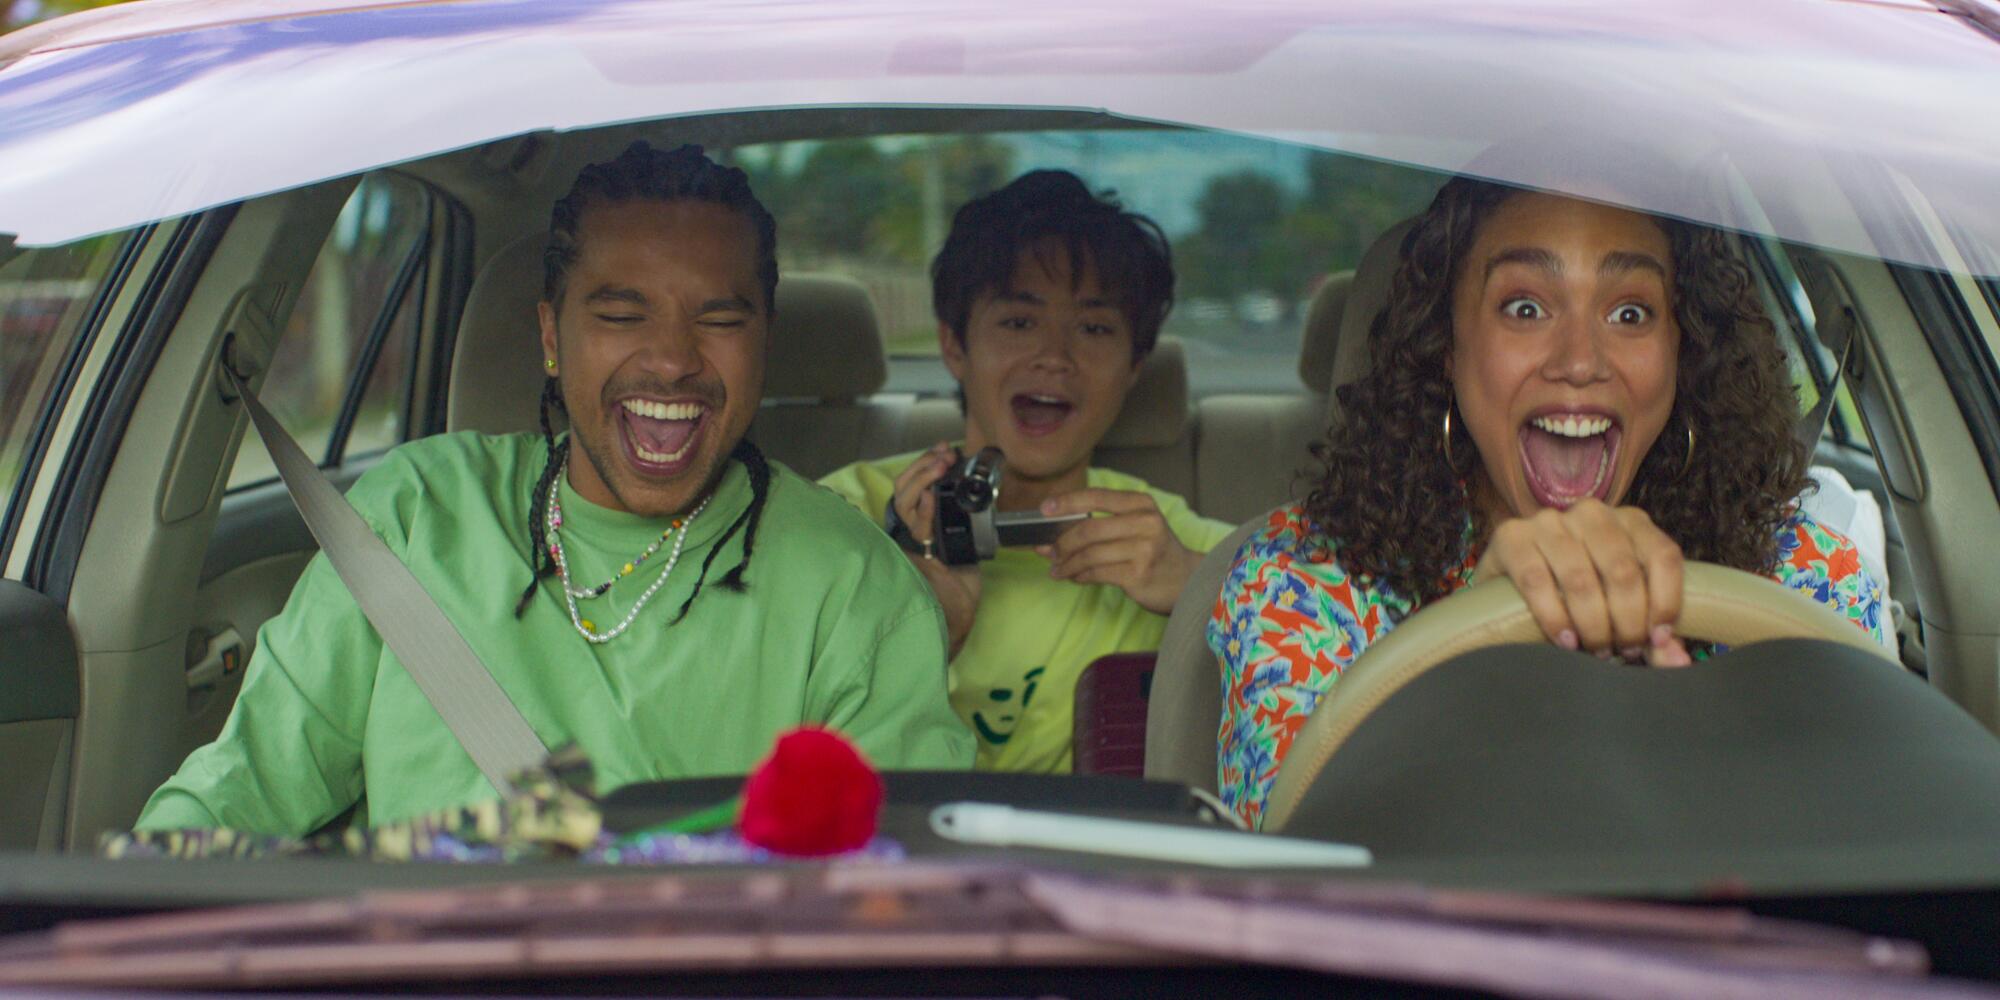 A man and a woman with wide smiles ride in the front seat of a car while another man holds a video camera in the backset.